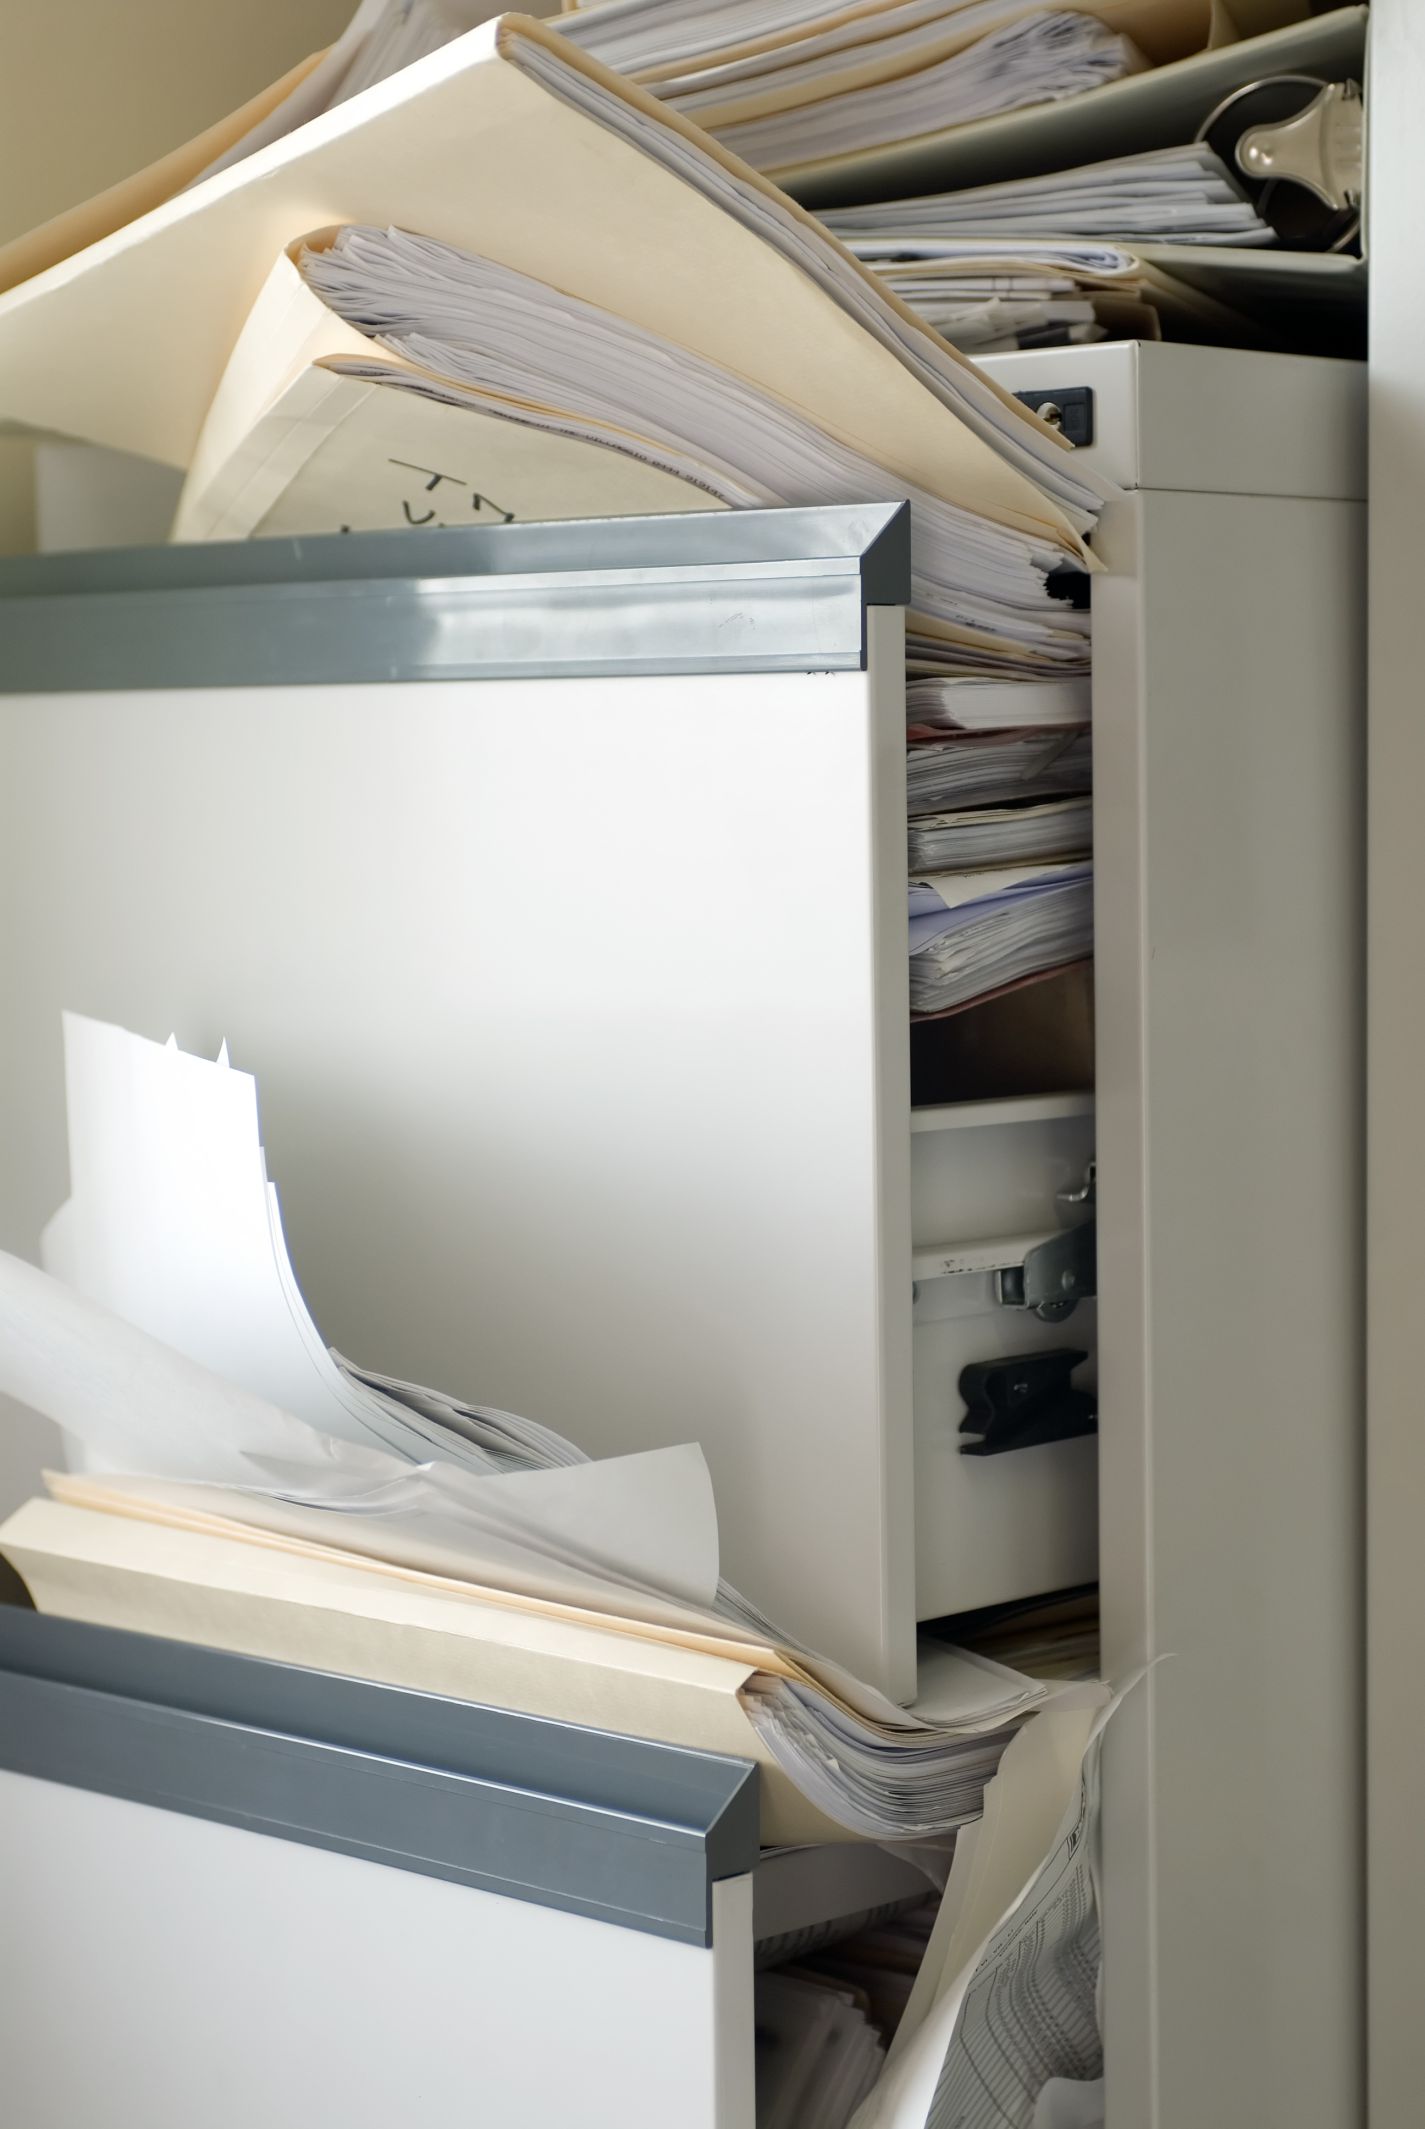 Photo shows a file drawer stuffed with many files indicating filed studies of ESP.